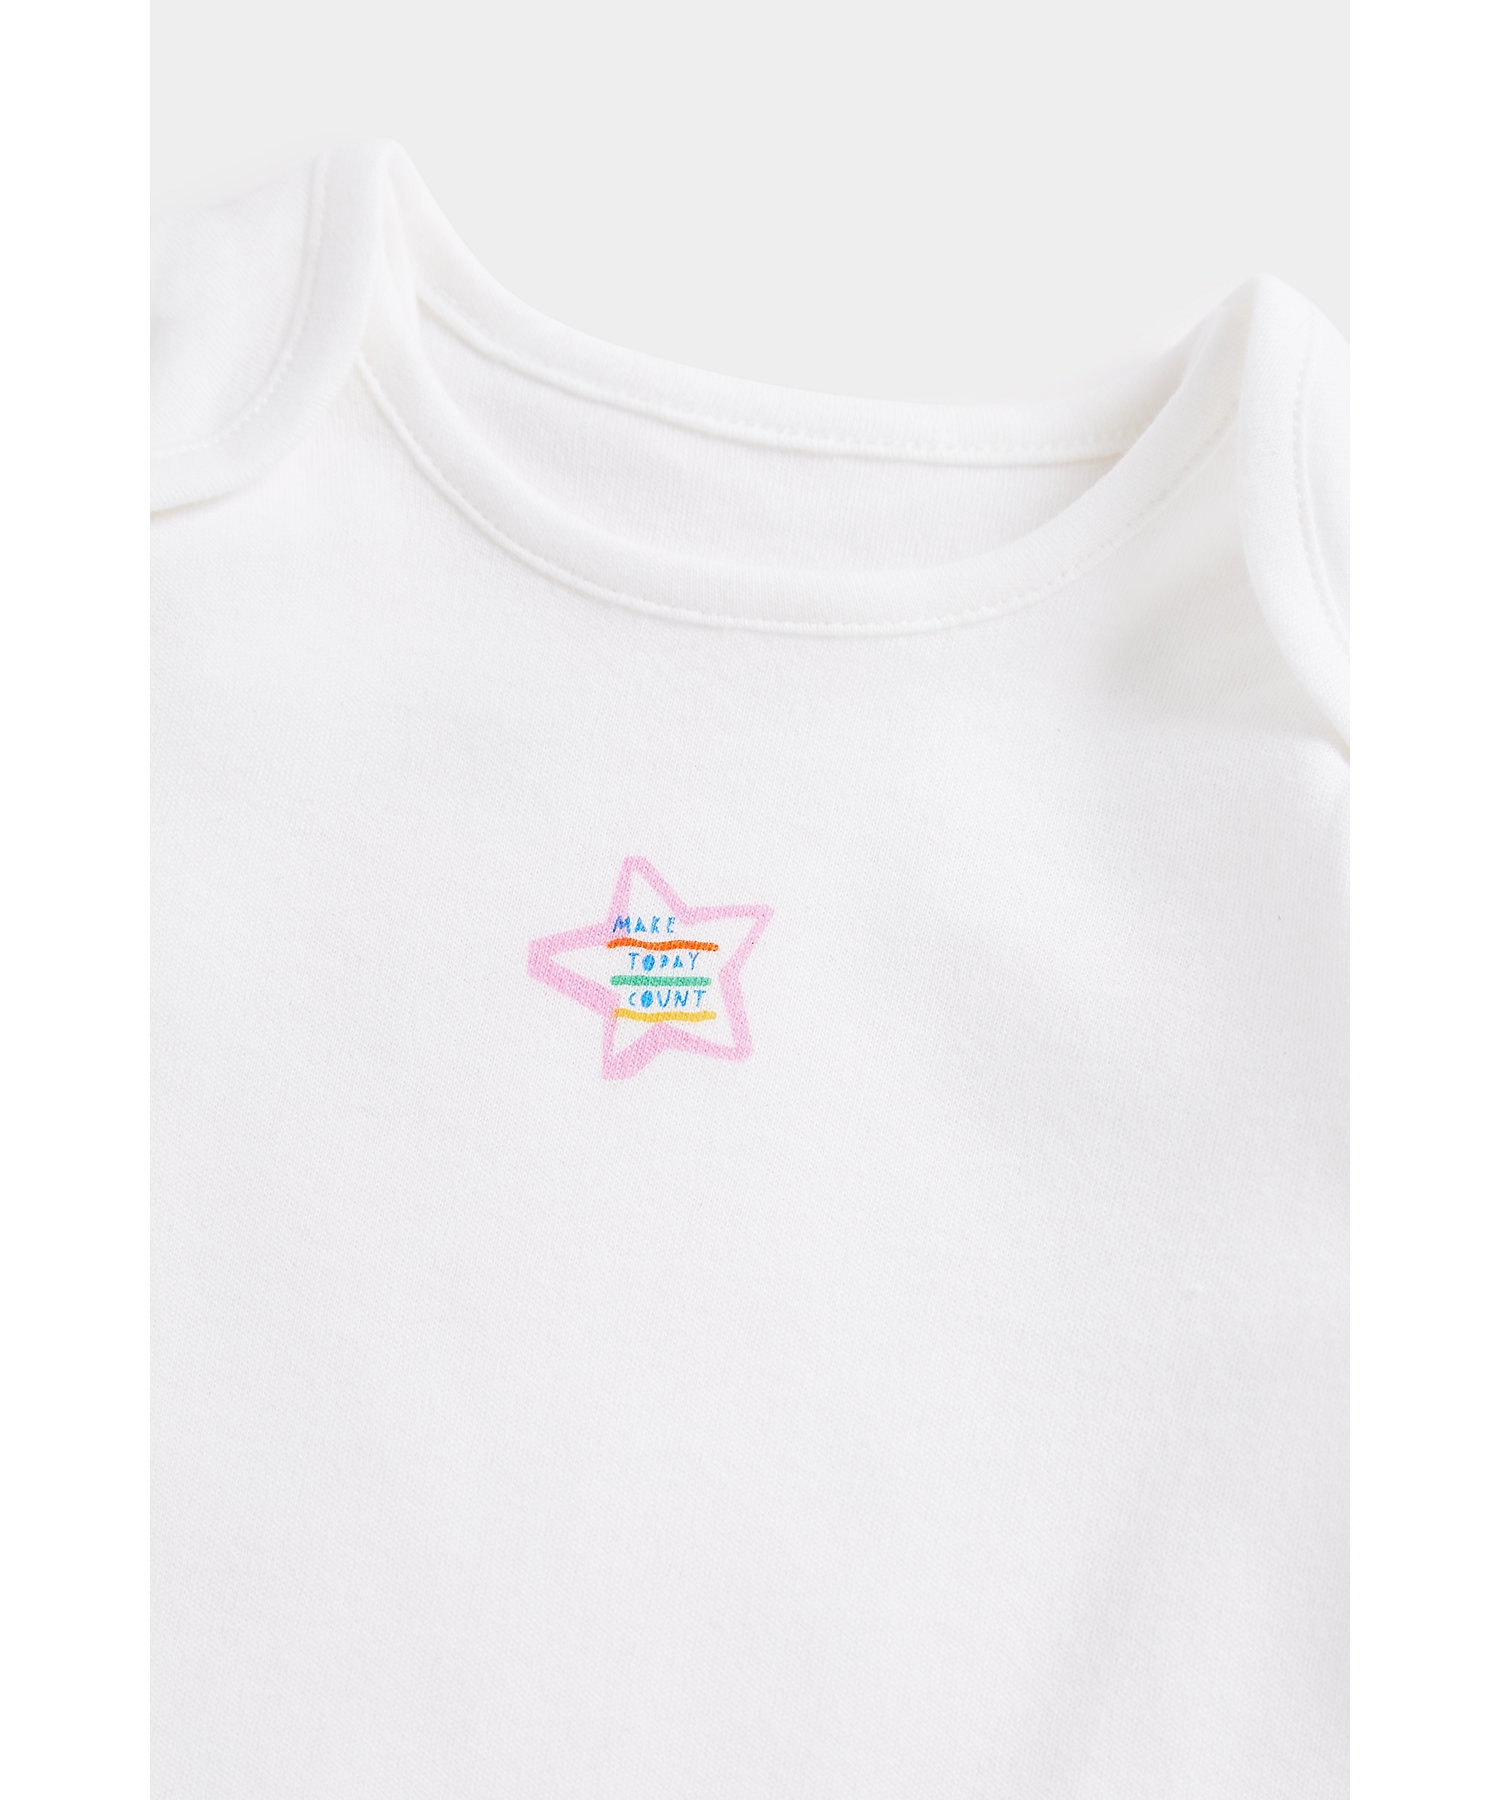 Mothercare | Girls Full Sleeves Bodysuits Fun Colorful Designs-Multicolor 7